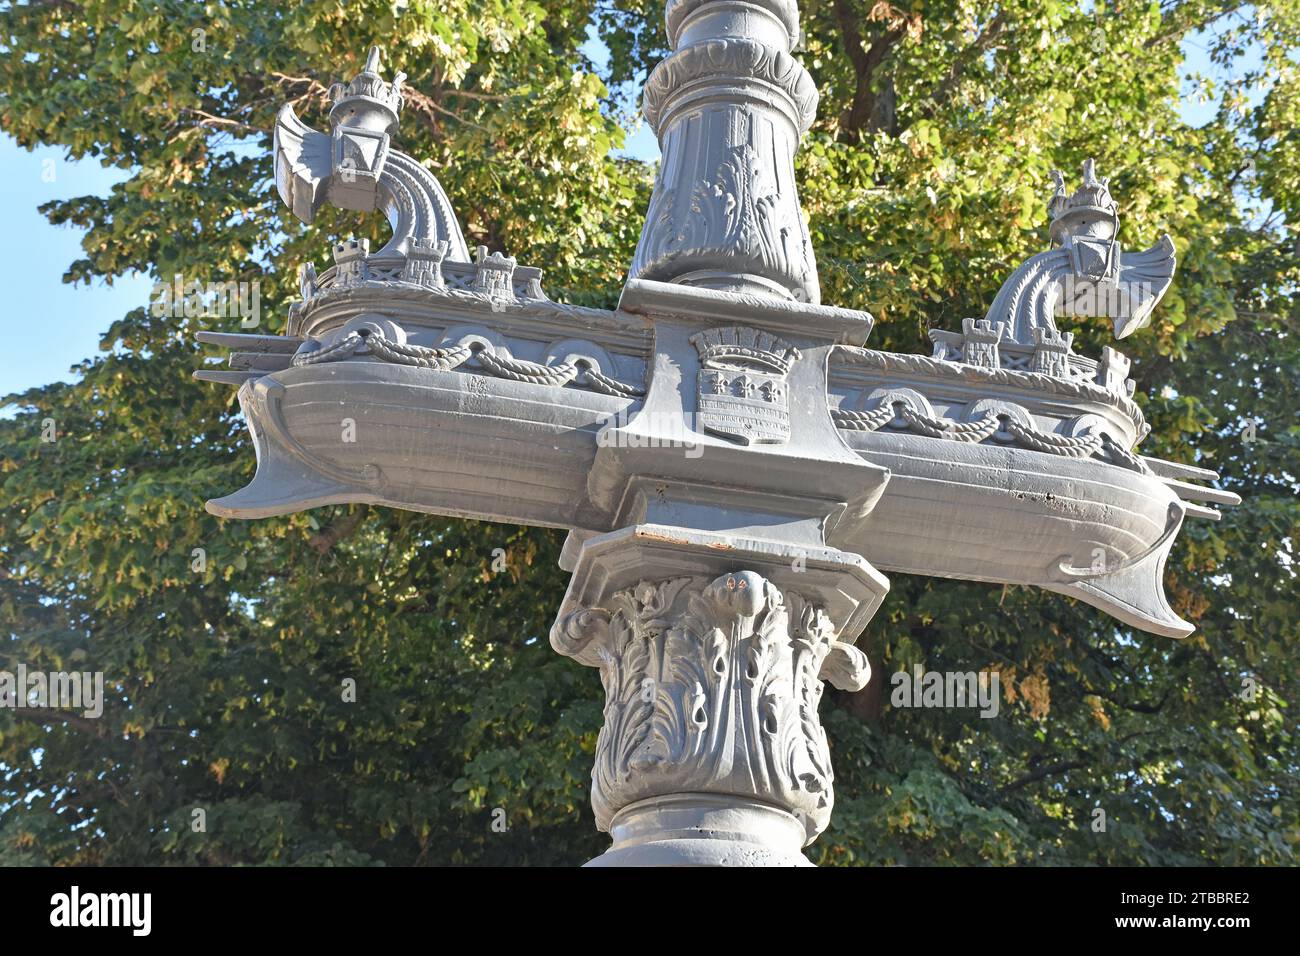 One of a pair of Rostral columns at the entrance to Plateau des Poètes, Beziers France, cast iron column with ship & glass globes of street lighting Stock Photo